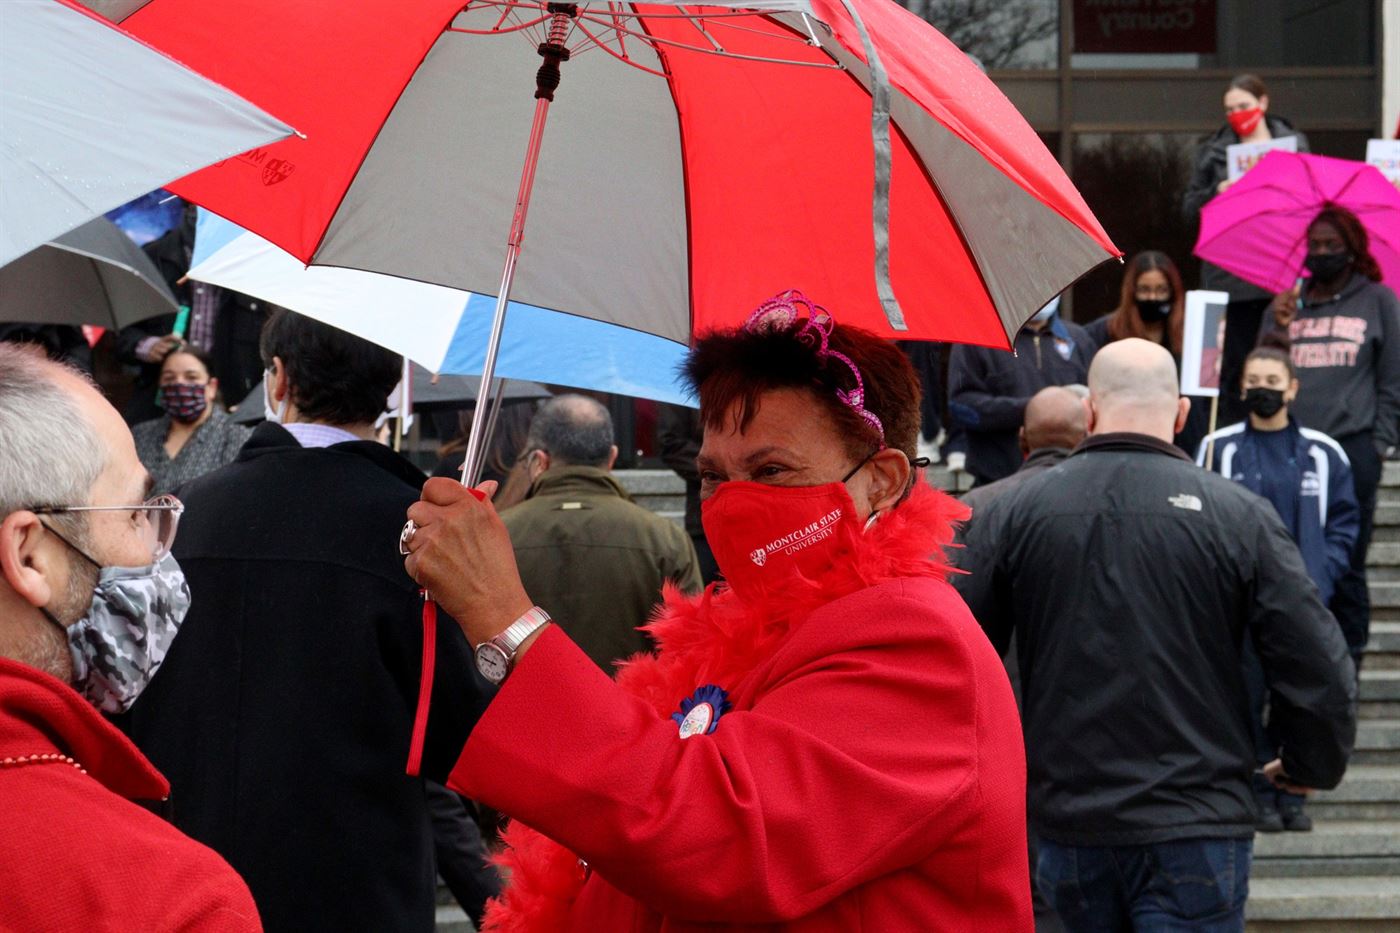 The forecast called for rain, but only at the very end of the parade did it start pouring. Dr. Pennington came prepared. John LaRosa | The Montclarion